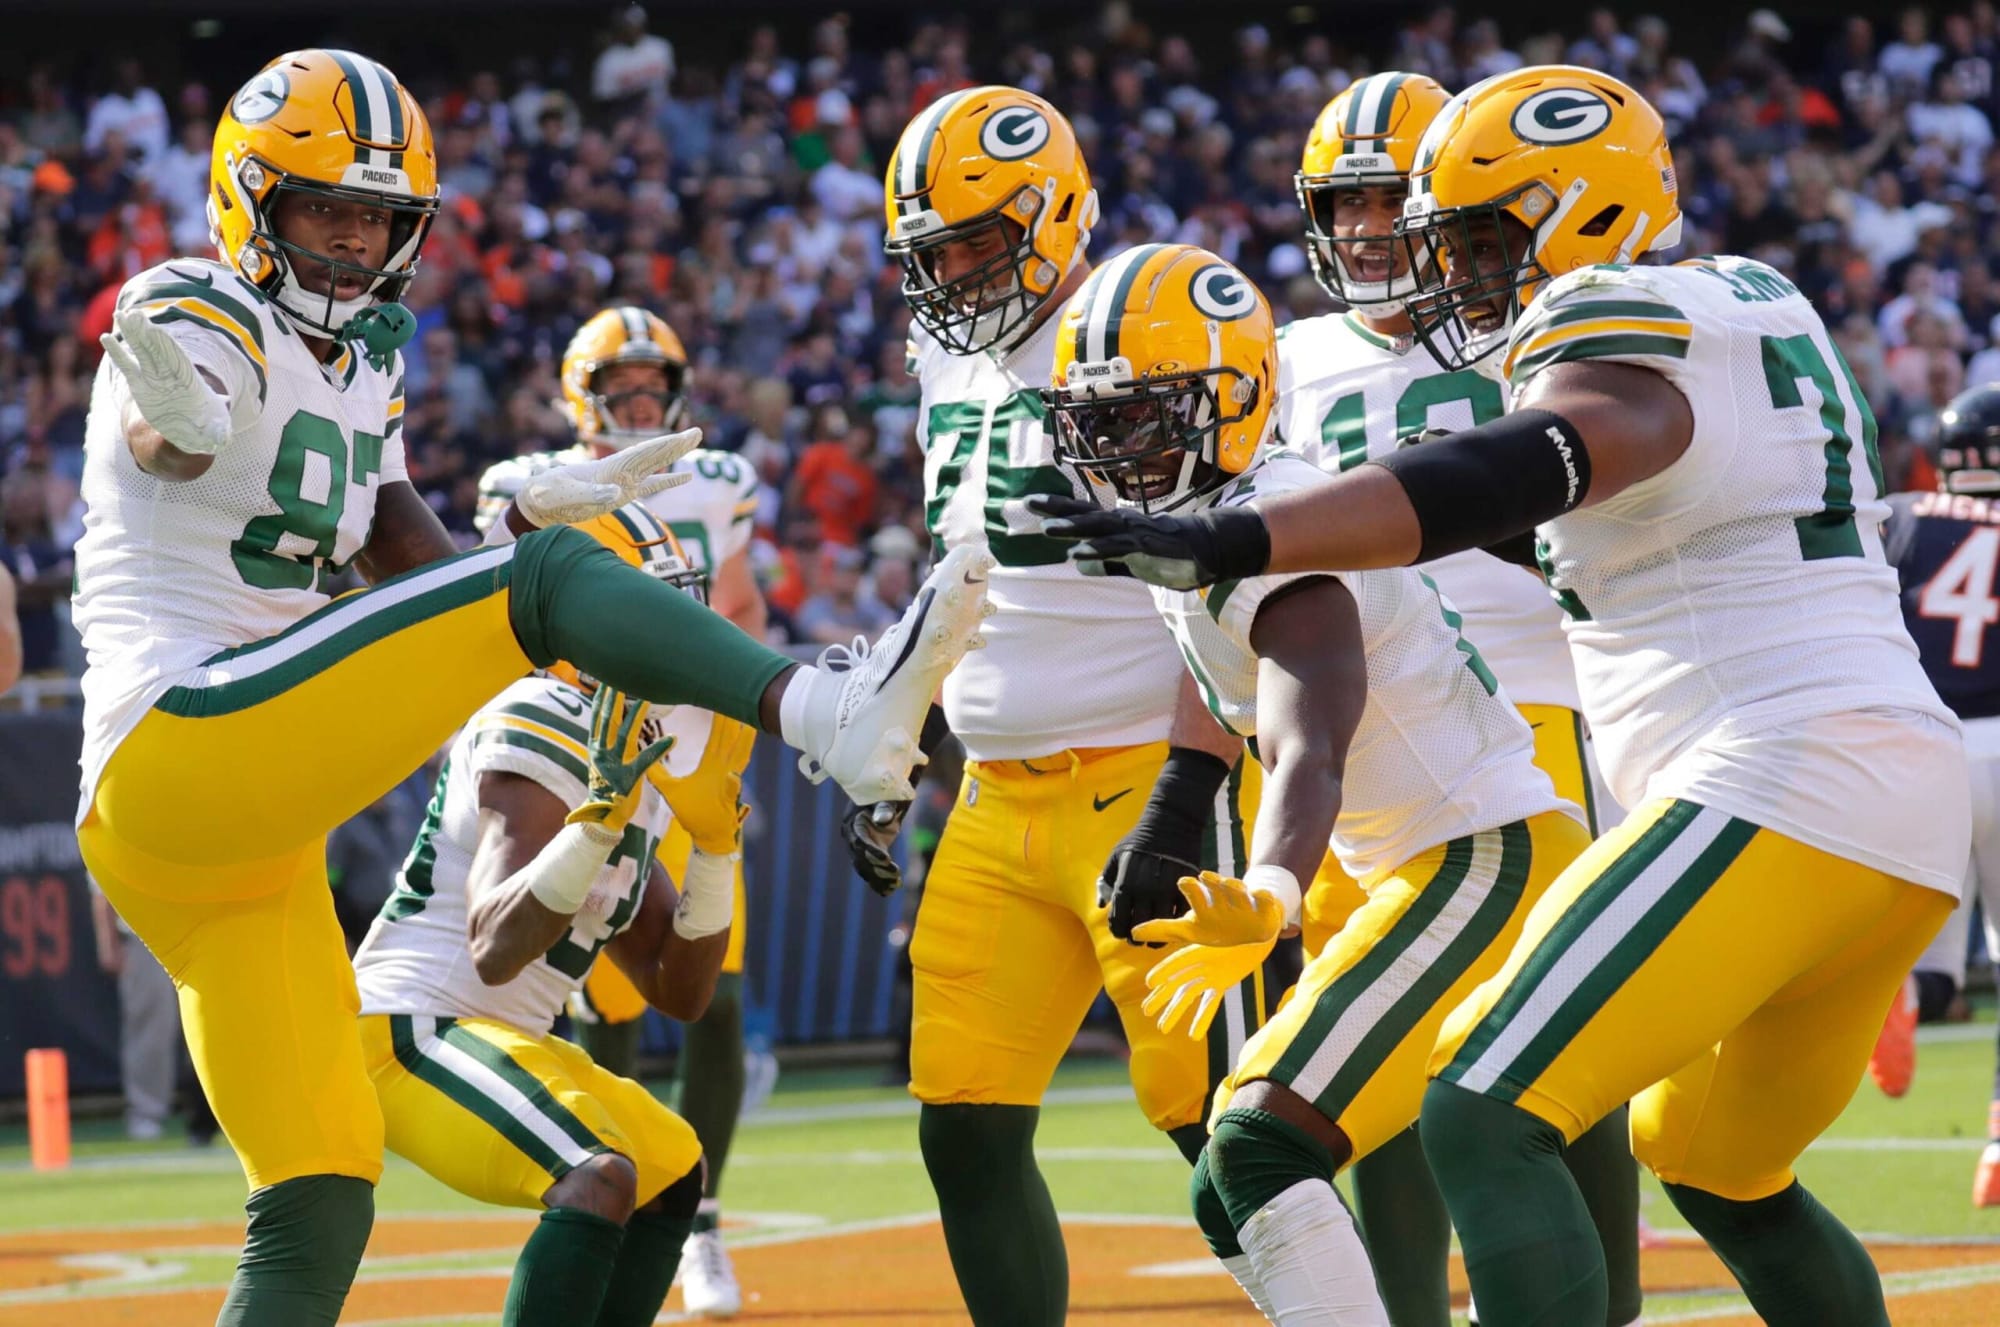 Game recap: 5 takeaways from Packers' victory over Bears